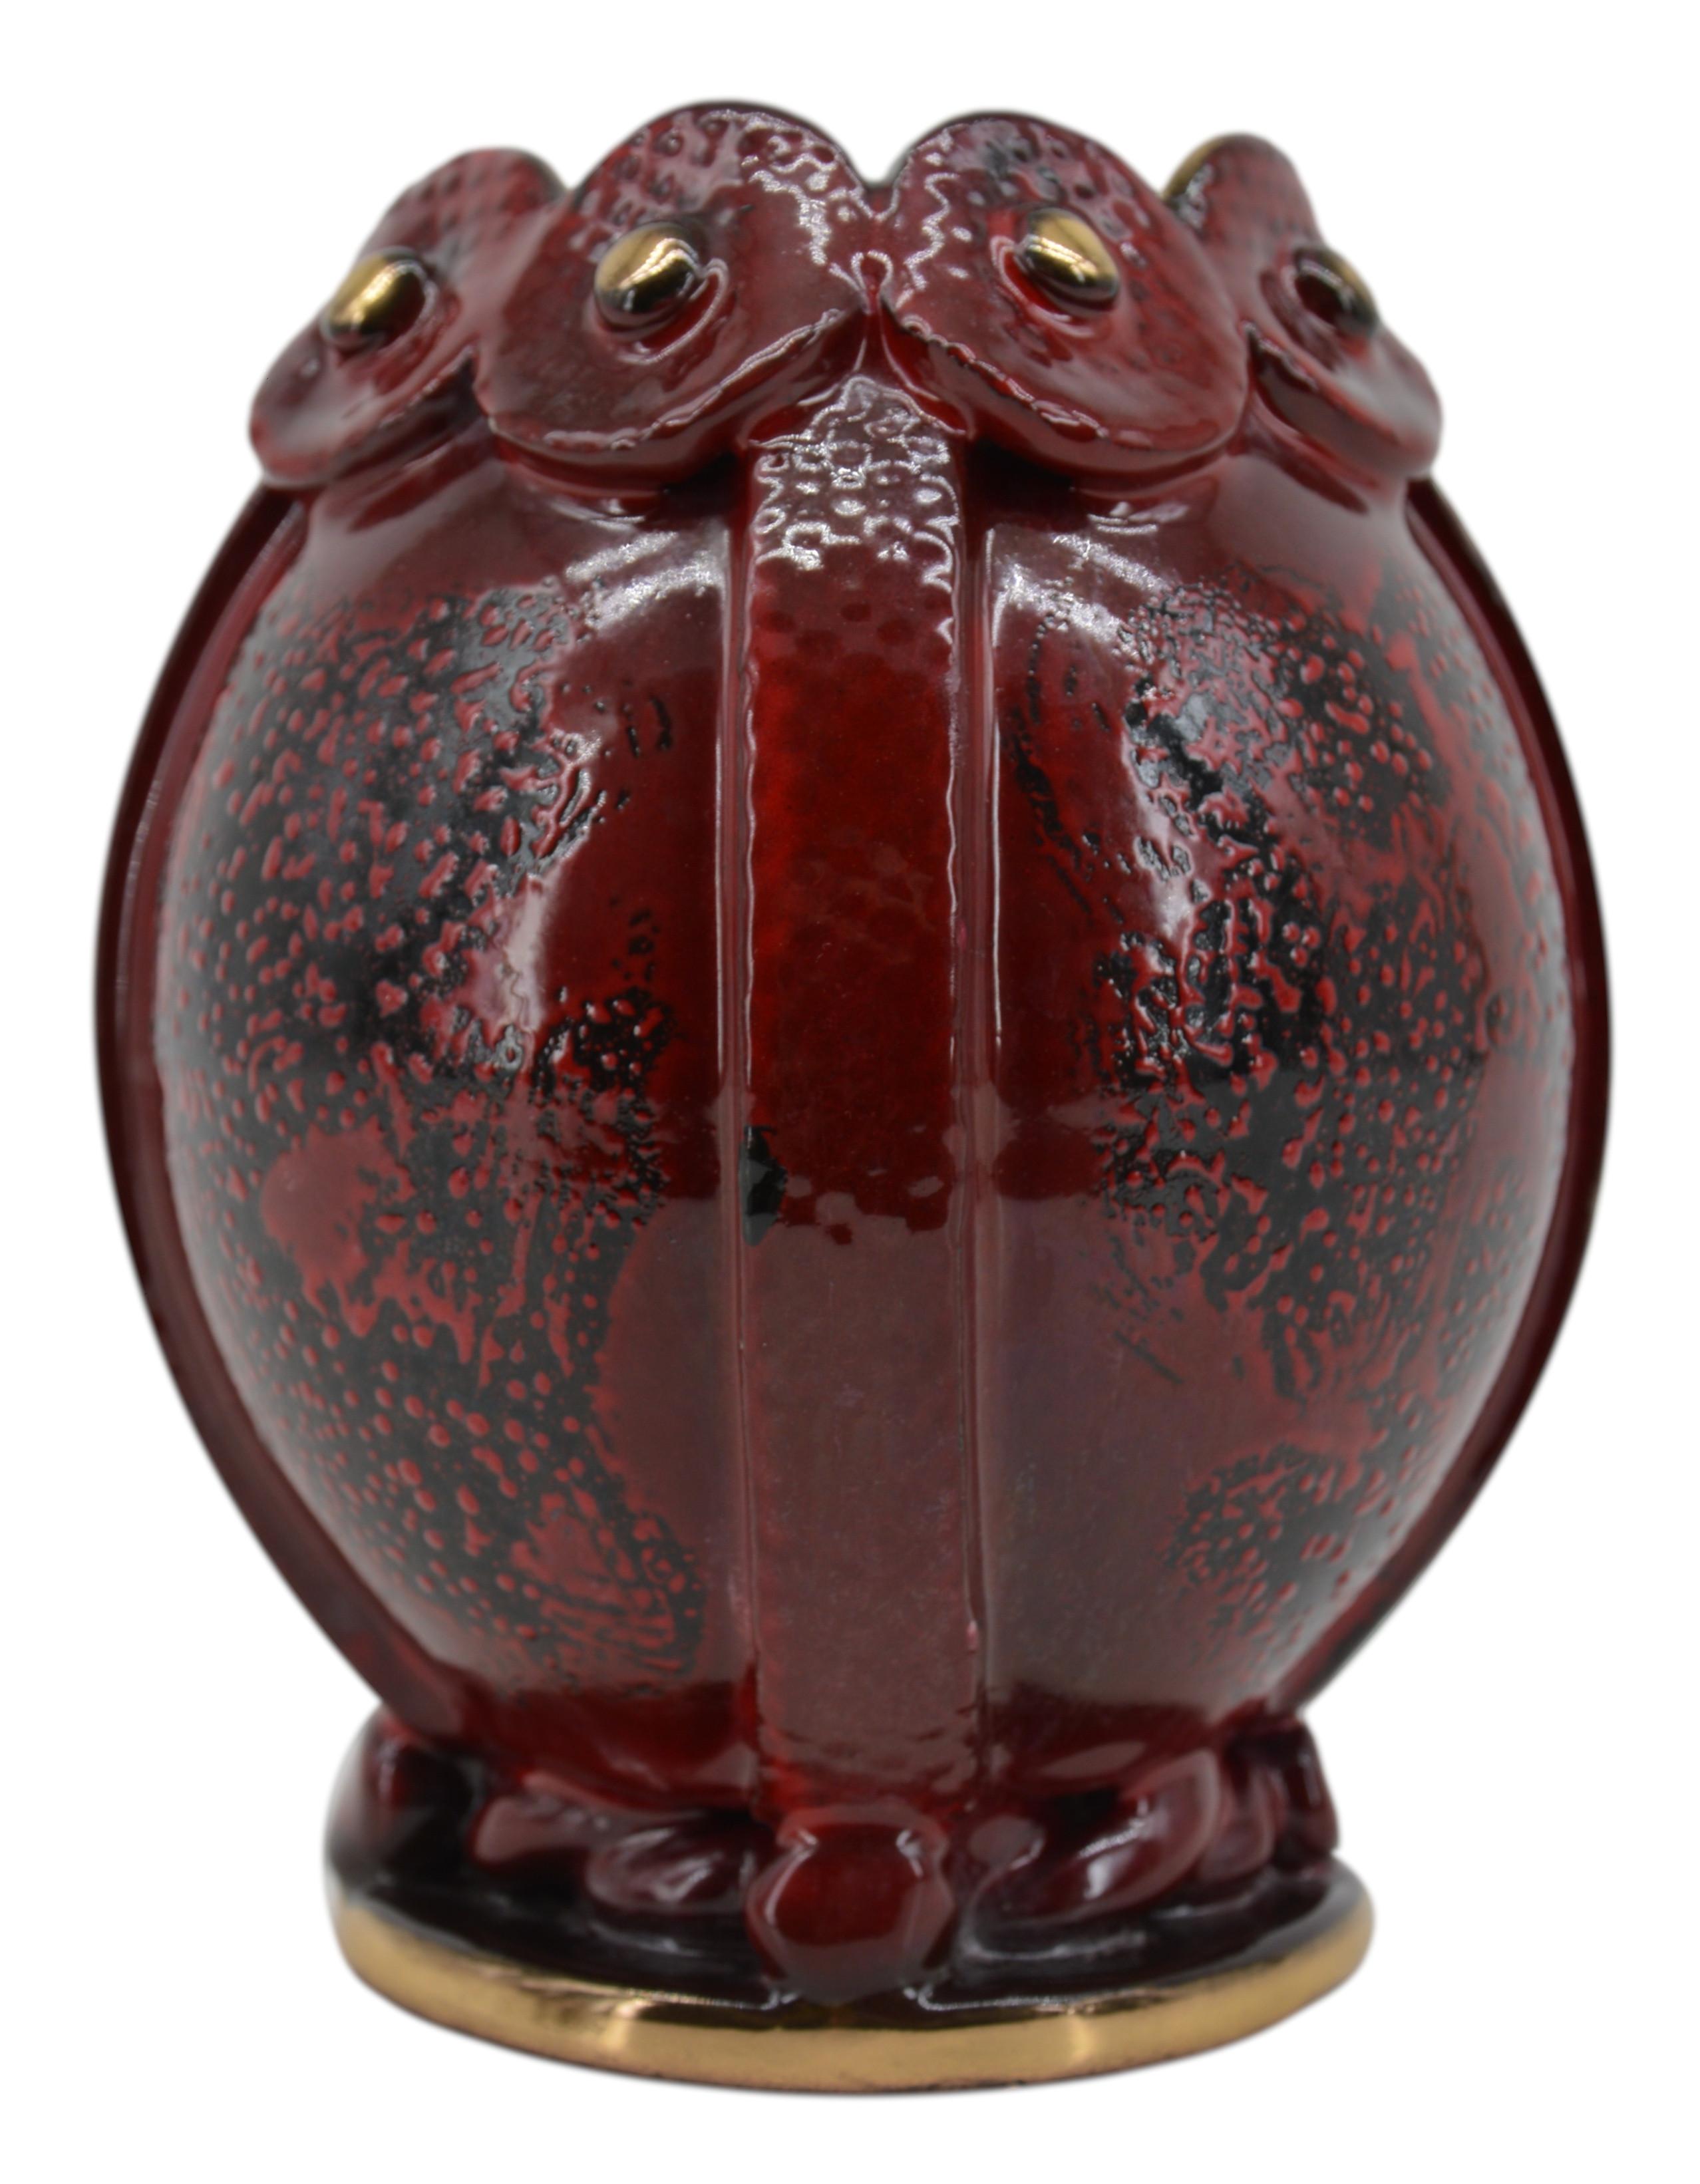 French Art Deco vase by Louis Dage (Anthony, Paris), France, ca.1930. Stoneware. Superb color combinations of oxblood, black and gold. Black inside. Measures: height: 6.5